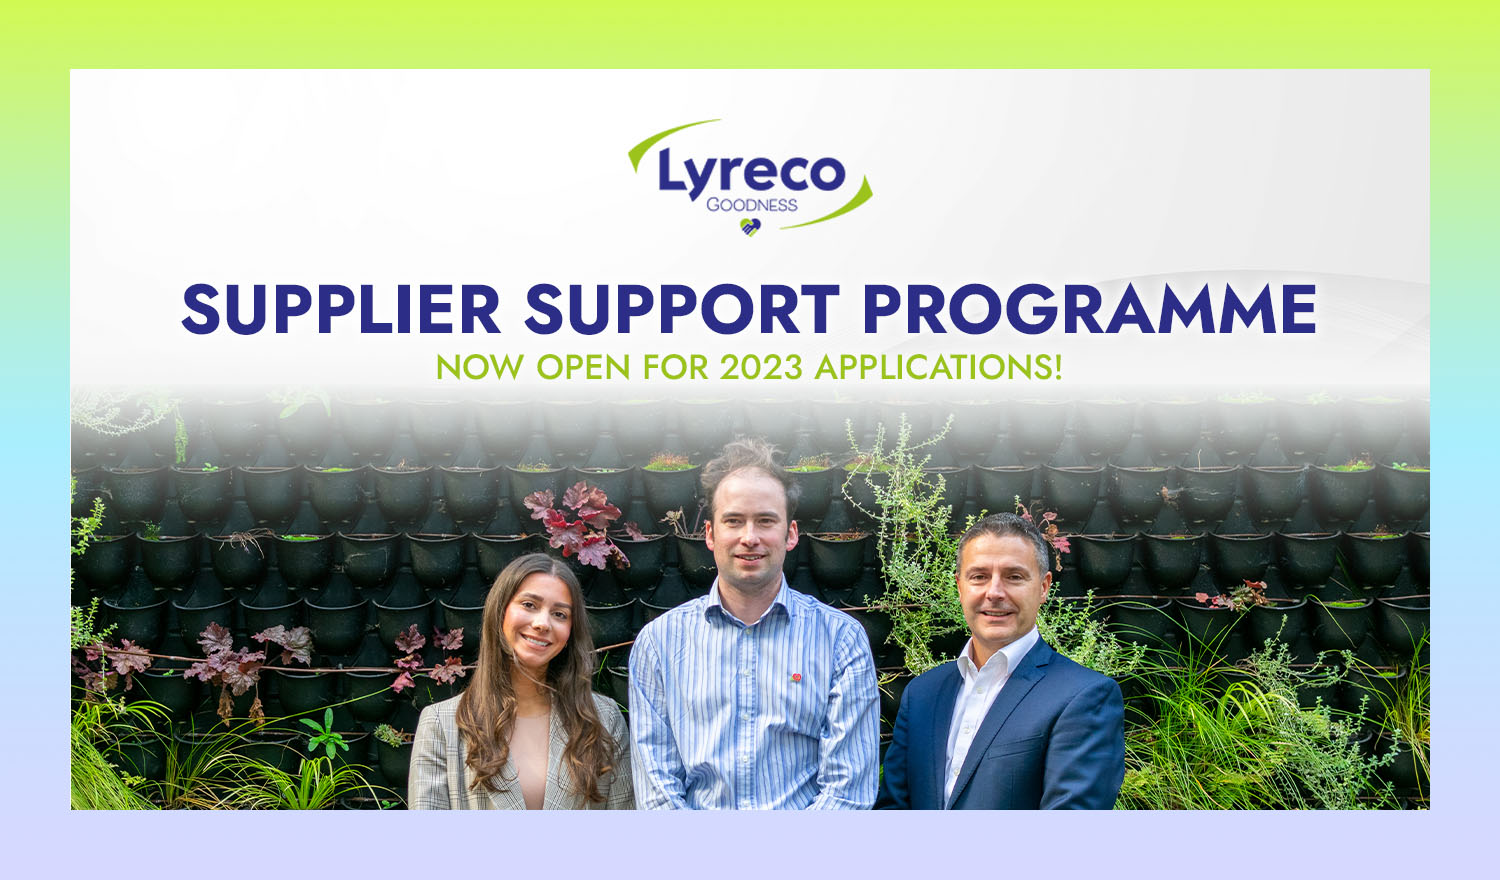 Lyreco Supplier Support Programme 2023